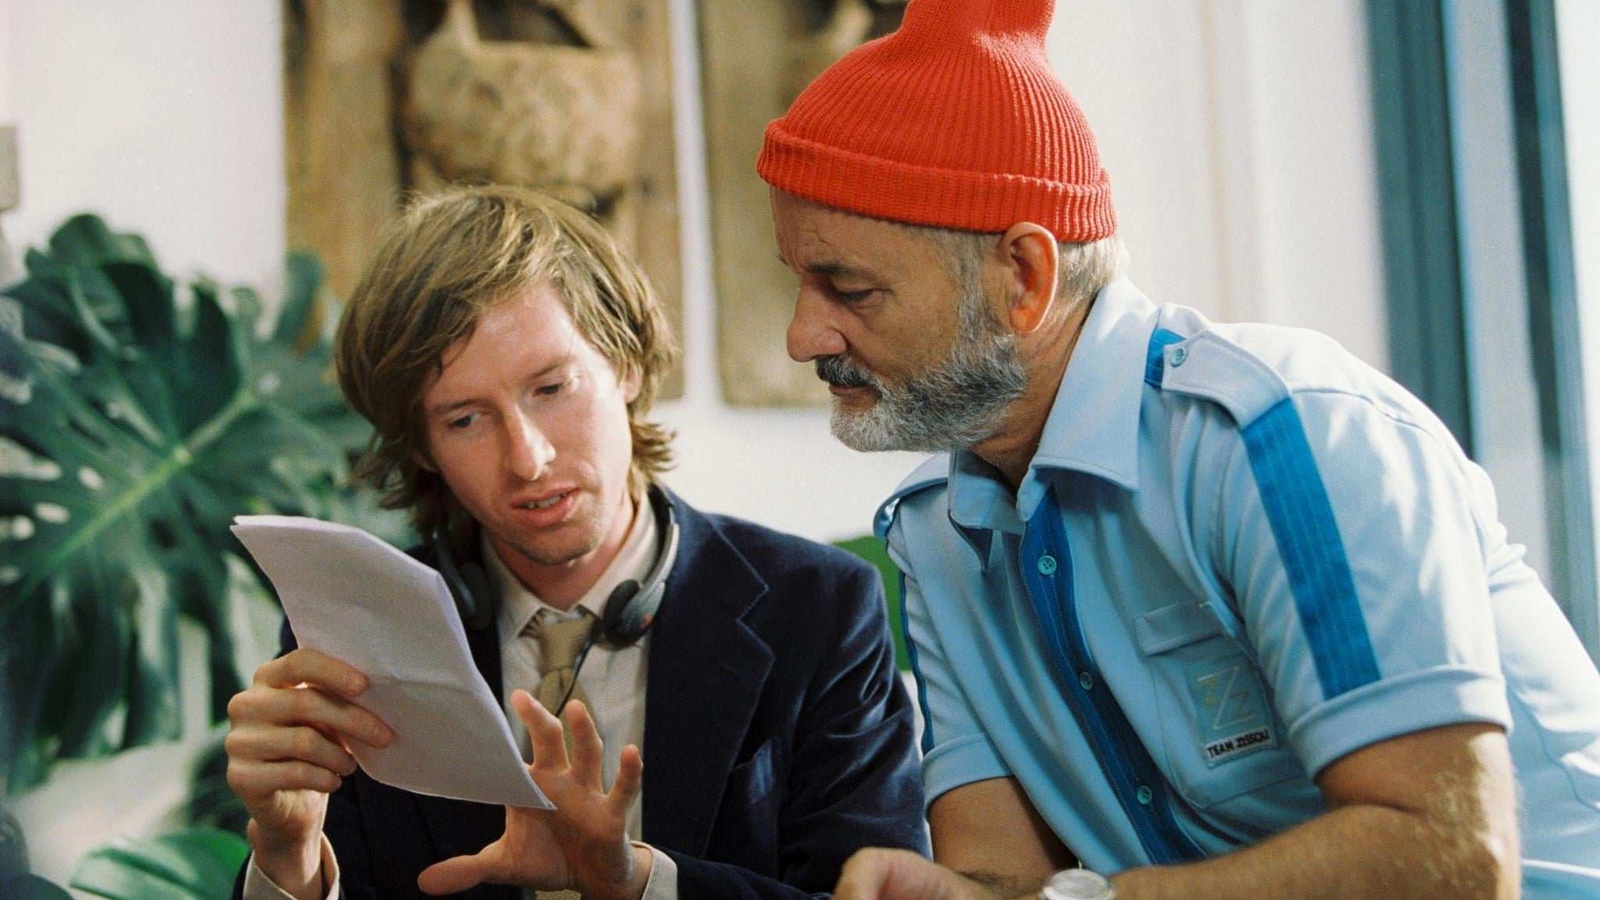 Wes Anderson on Bill Murray: 'He's family, molestation allegations don't change our bond'